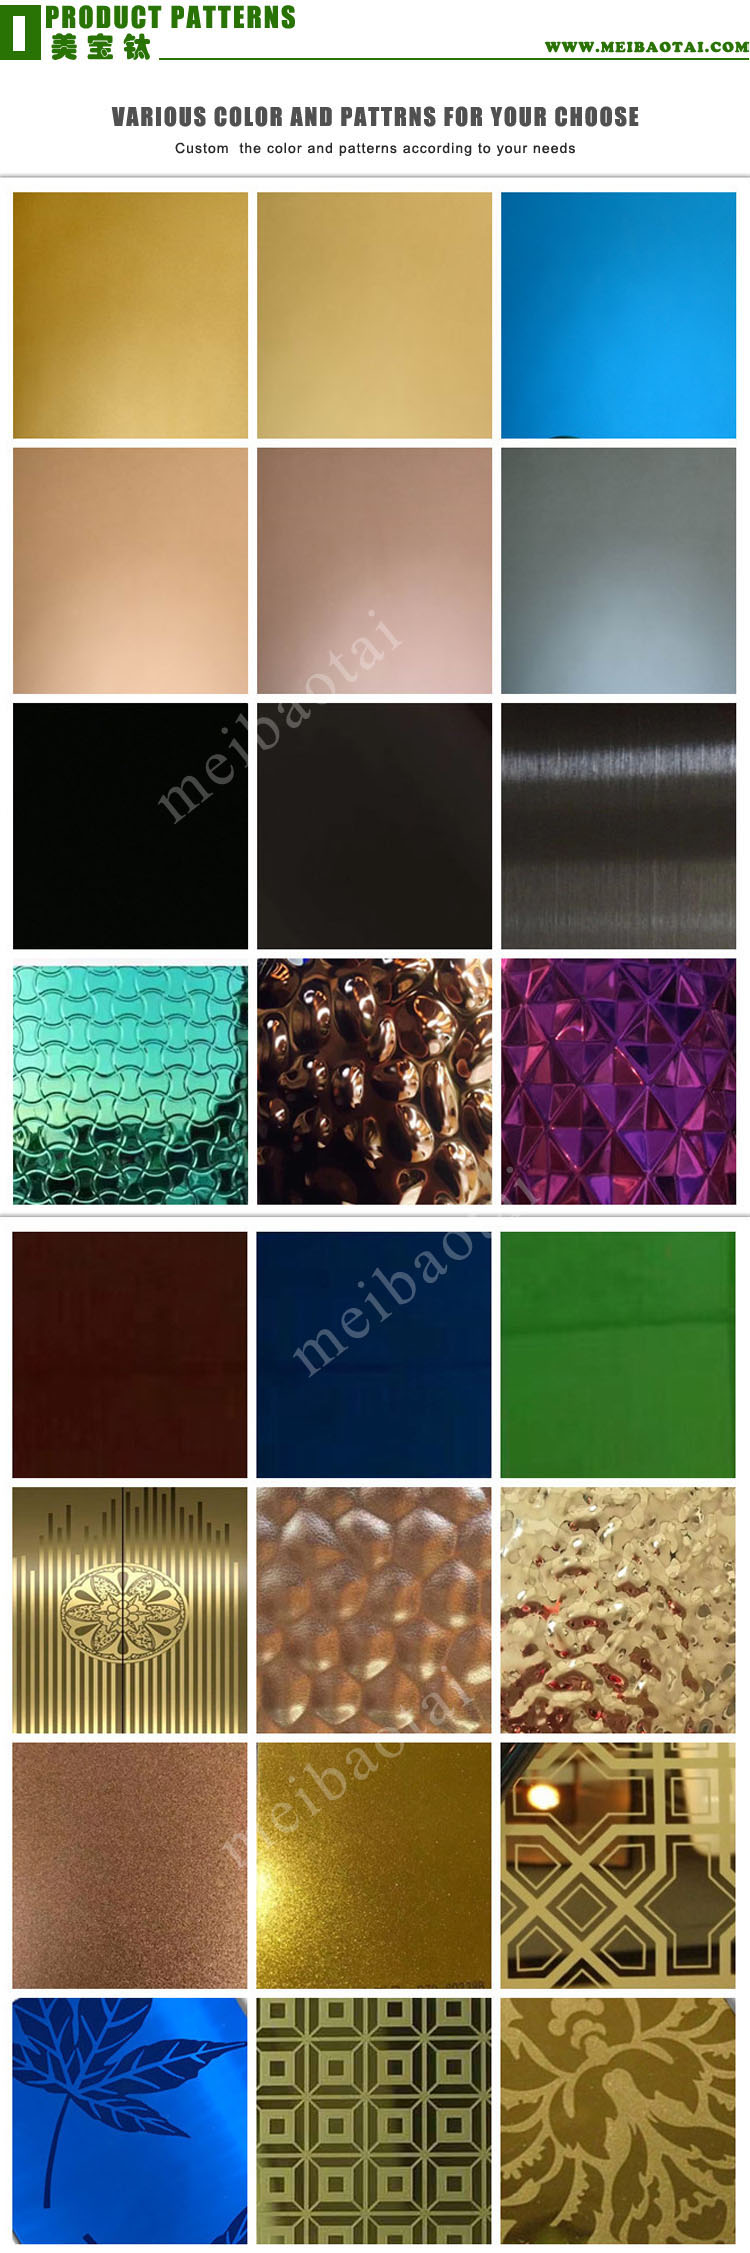 color_sheet_products_patterns